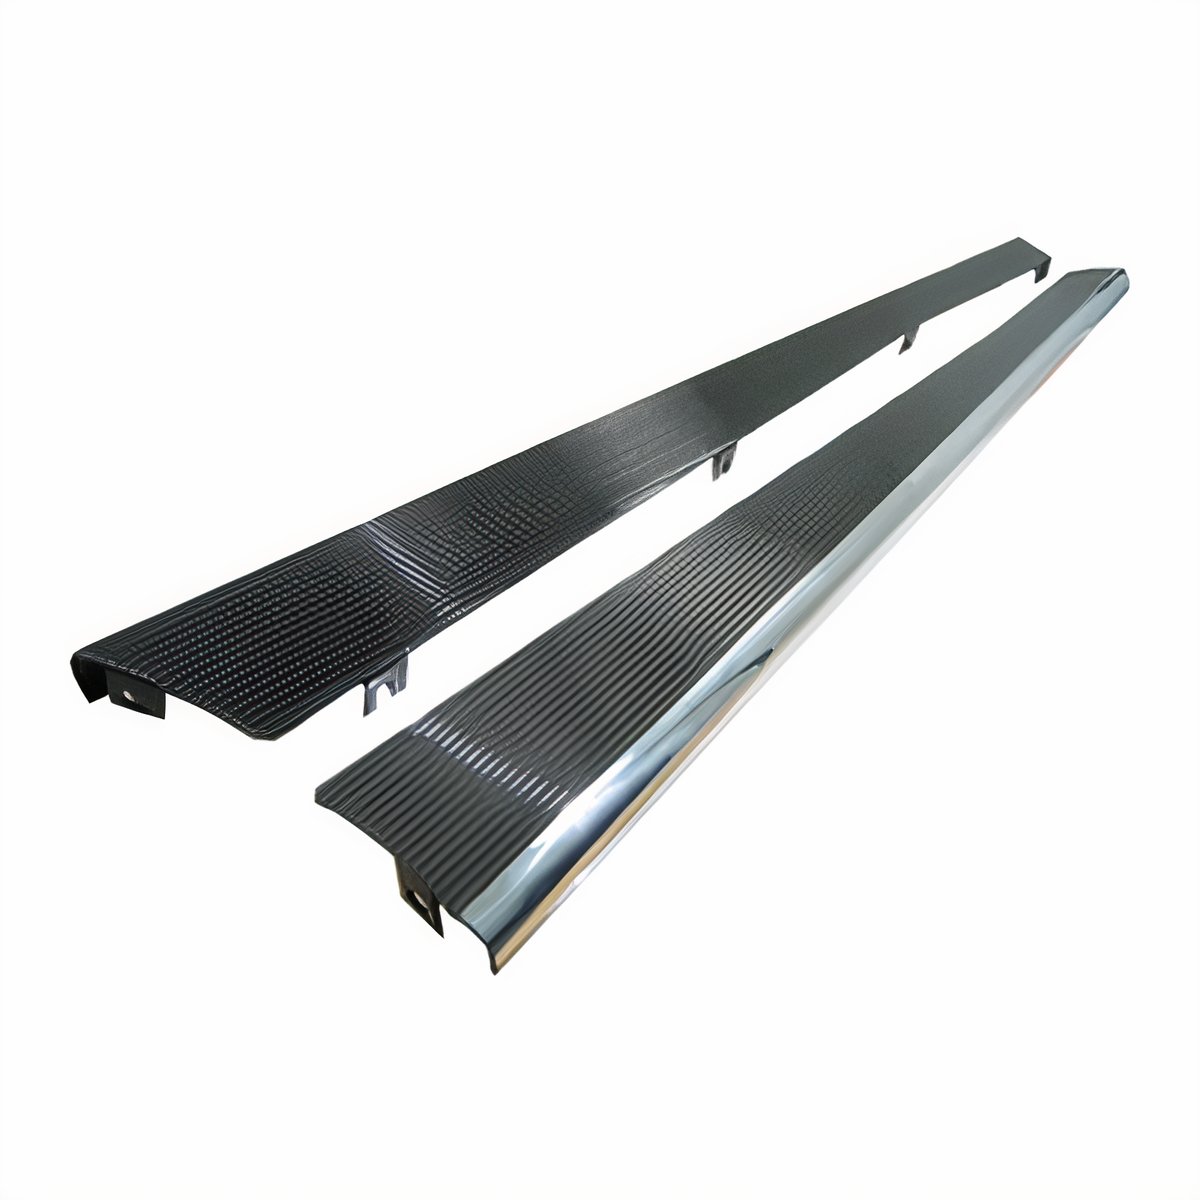 VW Running Boards - Billet Aluminum - Gloss Black With Polished Lip - Made in USA - Pair